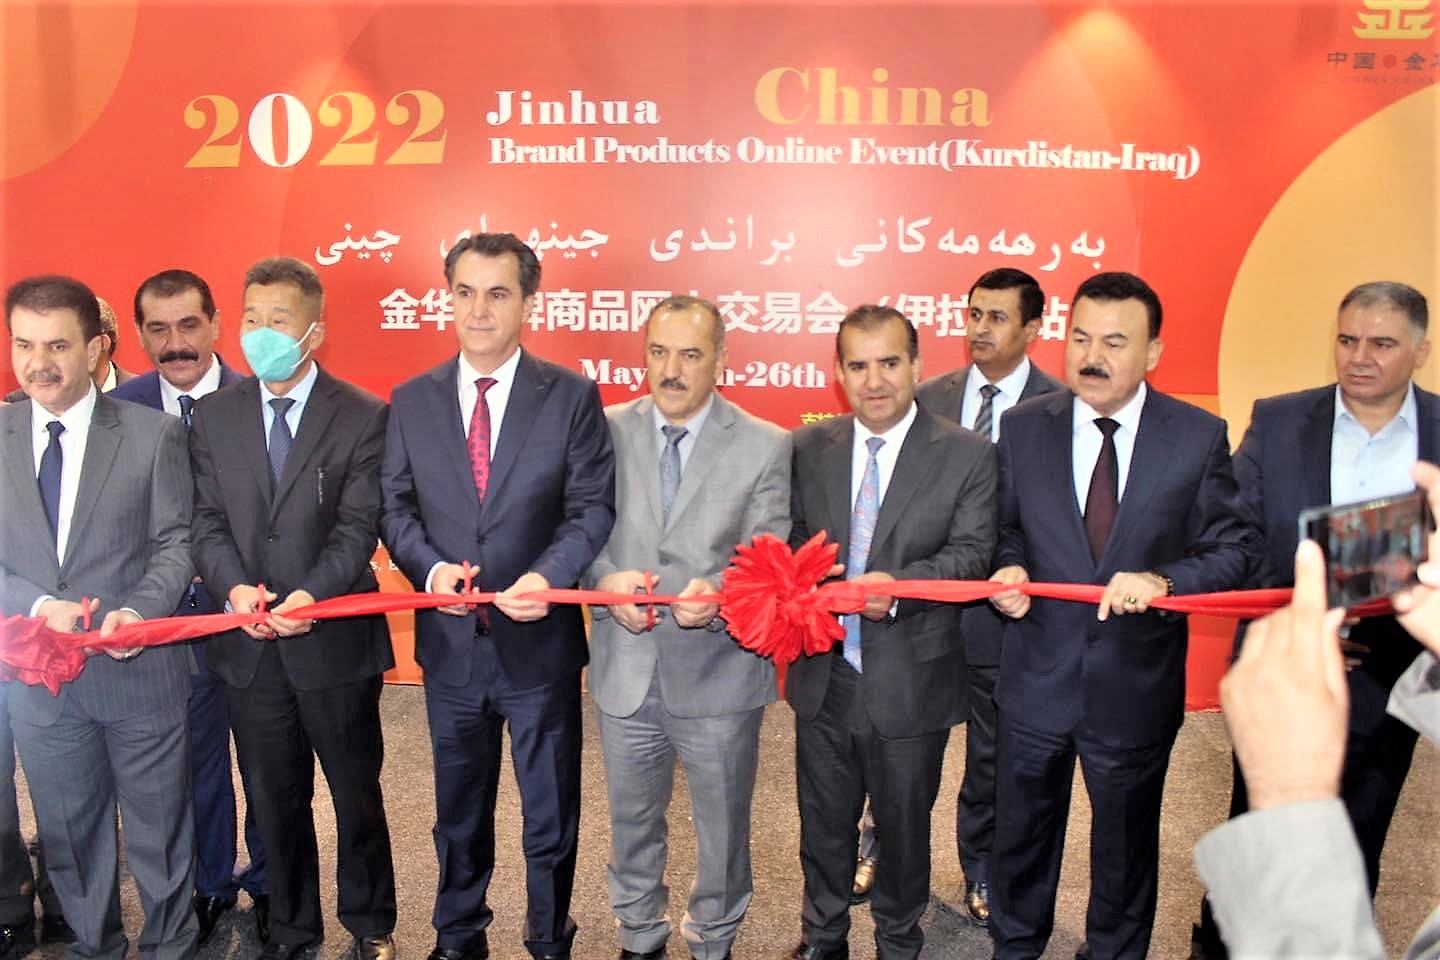 (The Minister of the Ministry of Trade of Iraq and the Consul General in Erbil cut the ribbon)